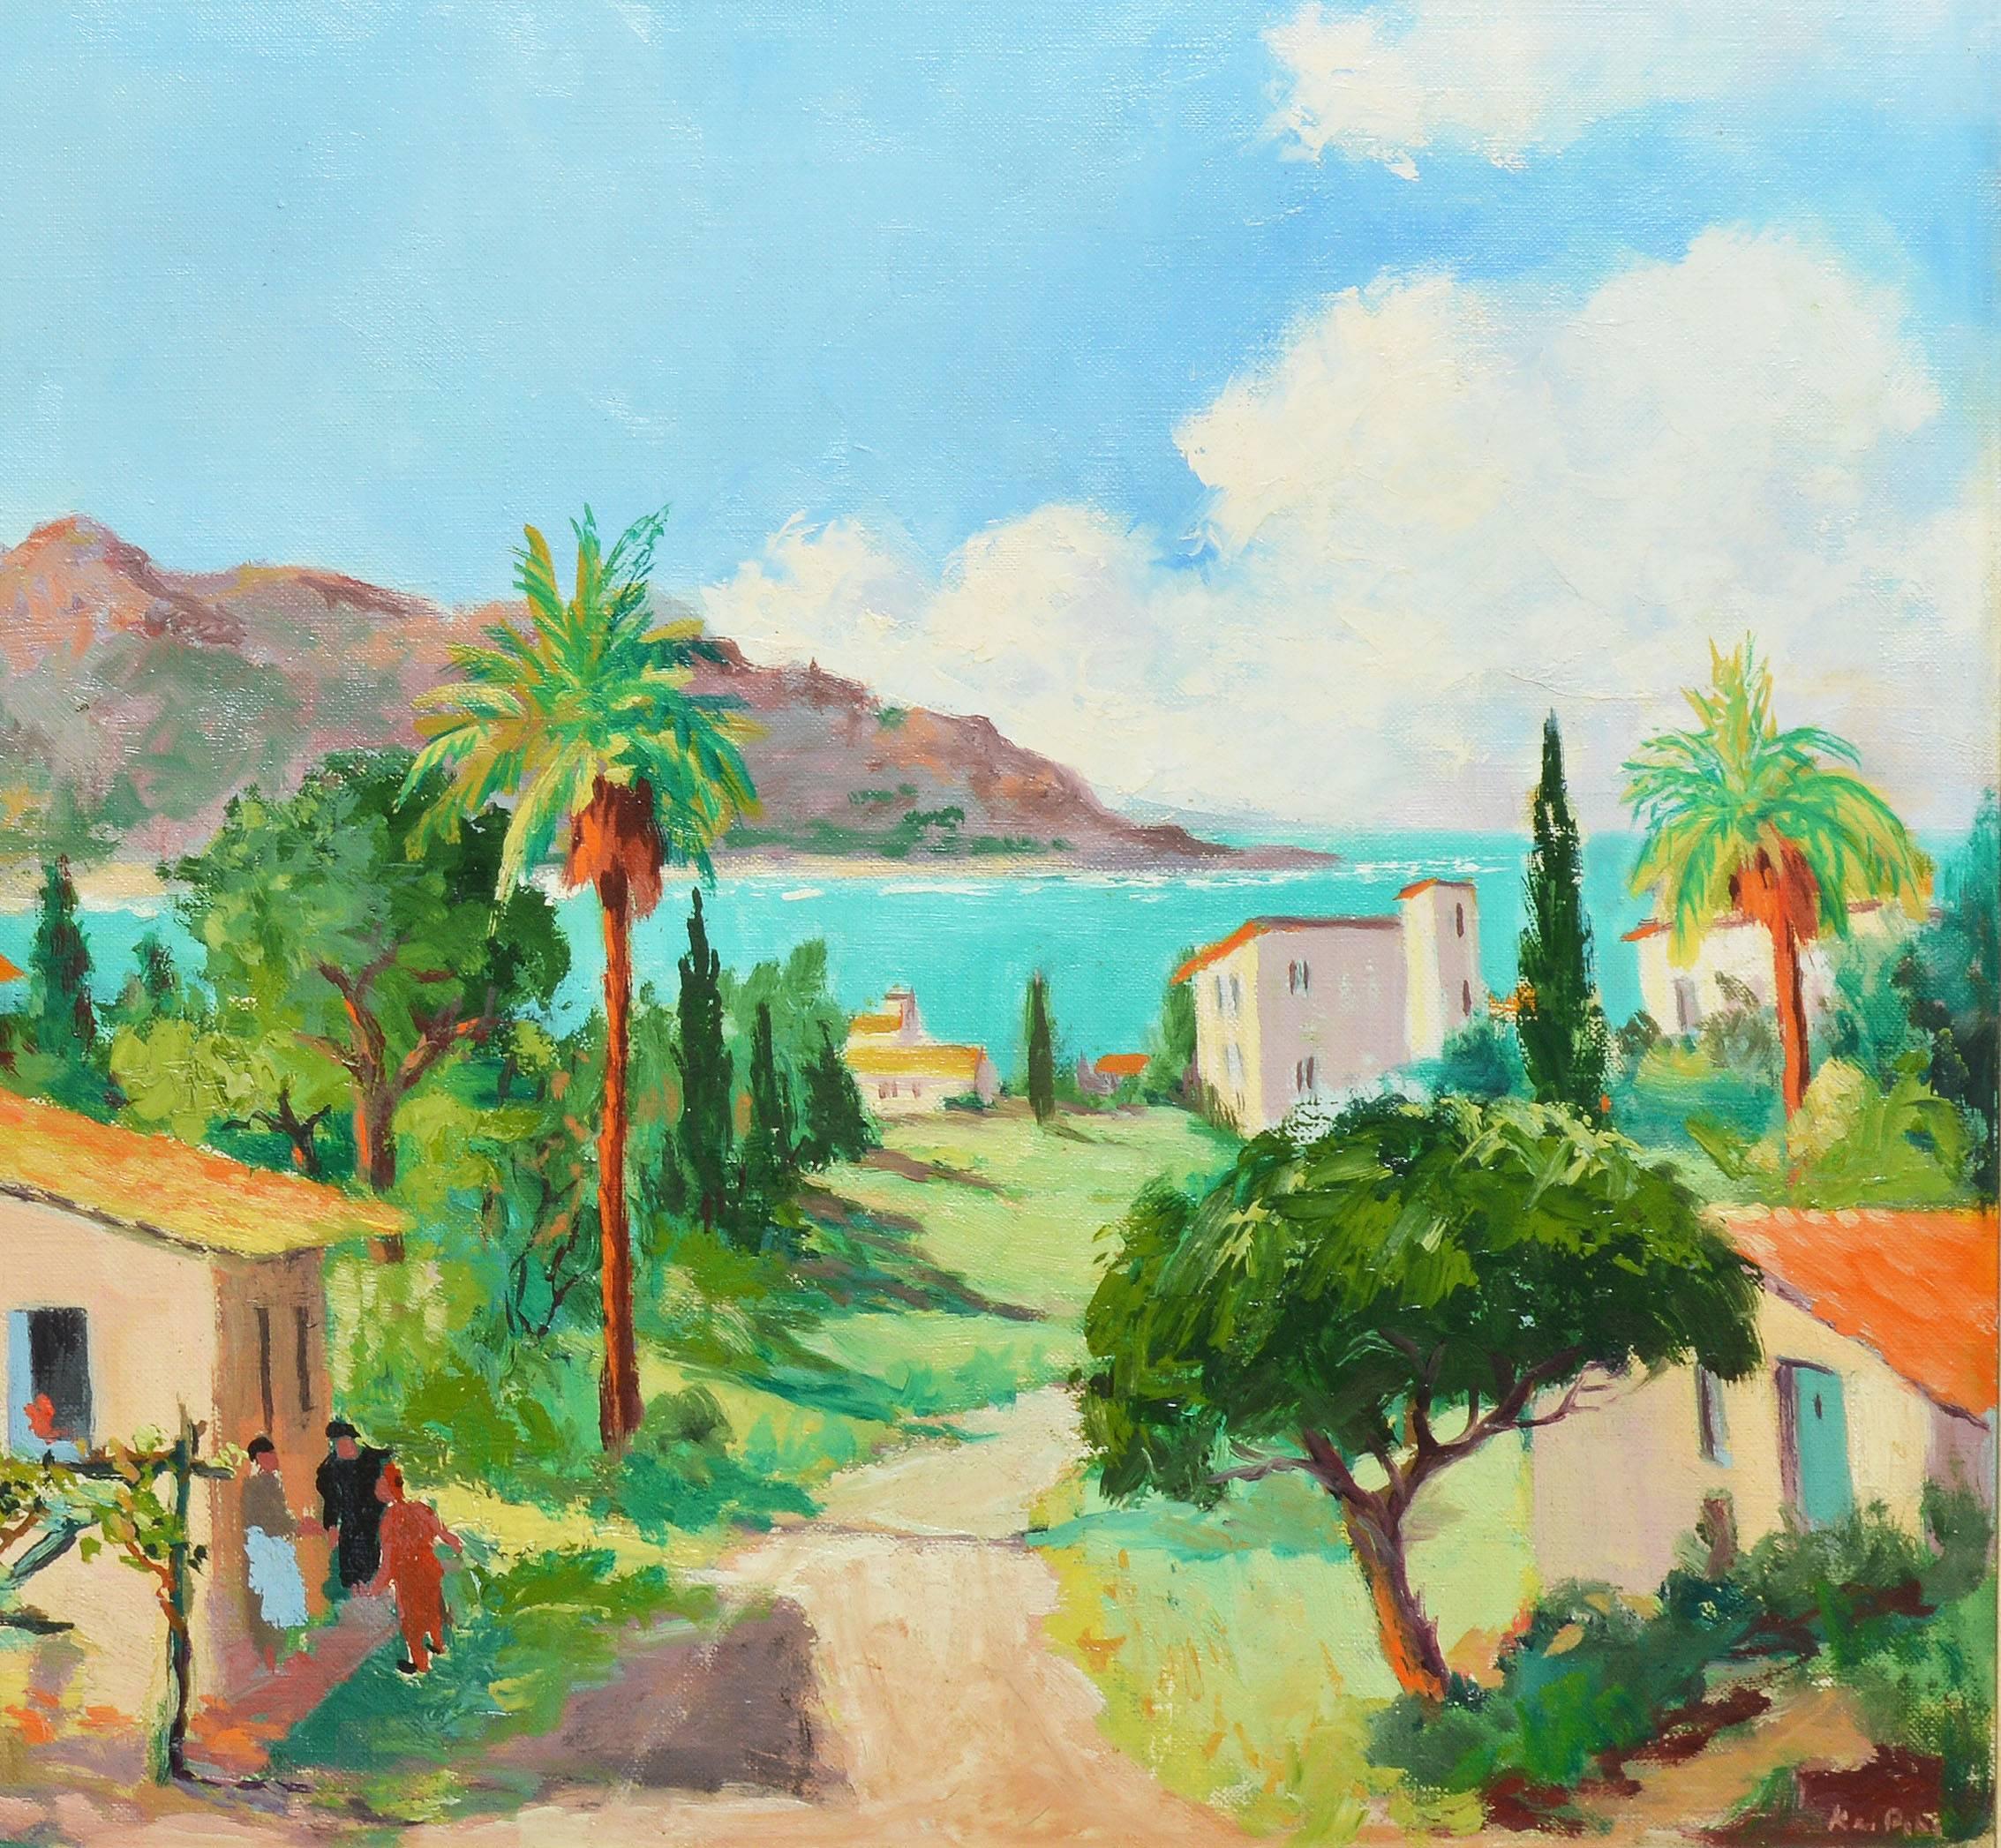 Impressionist painting of a mediterranean beach view.  Oil on canvas, circa 1940.  Signed illegibly lower right.  Displayed in a giltwood frame.  Image size, 20"L x 16"H, overall 26"L x 22"H.